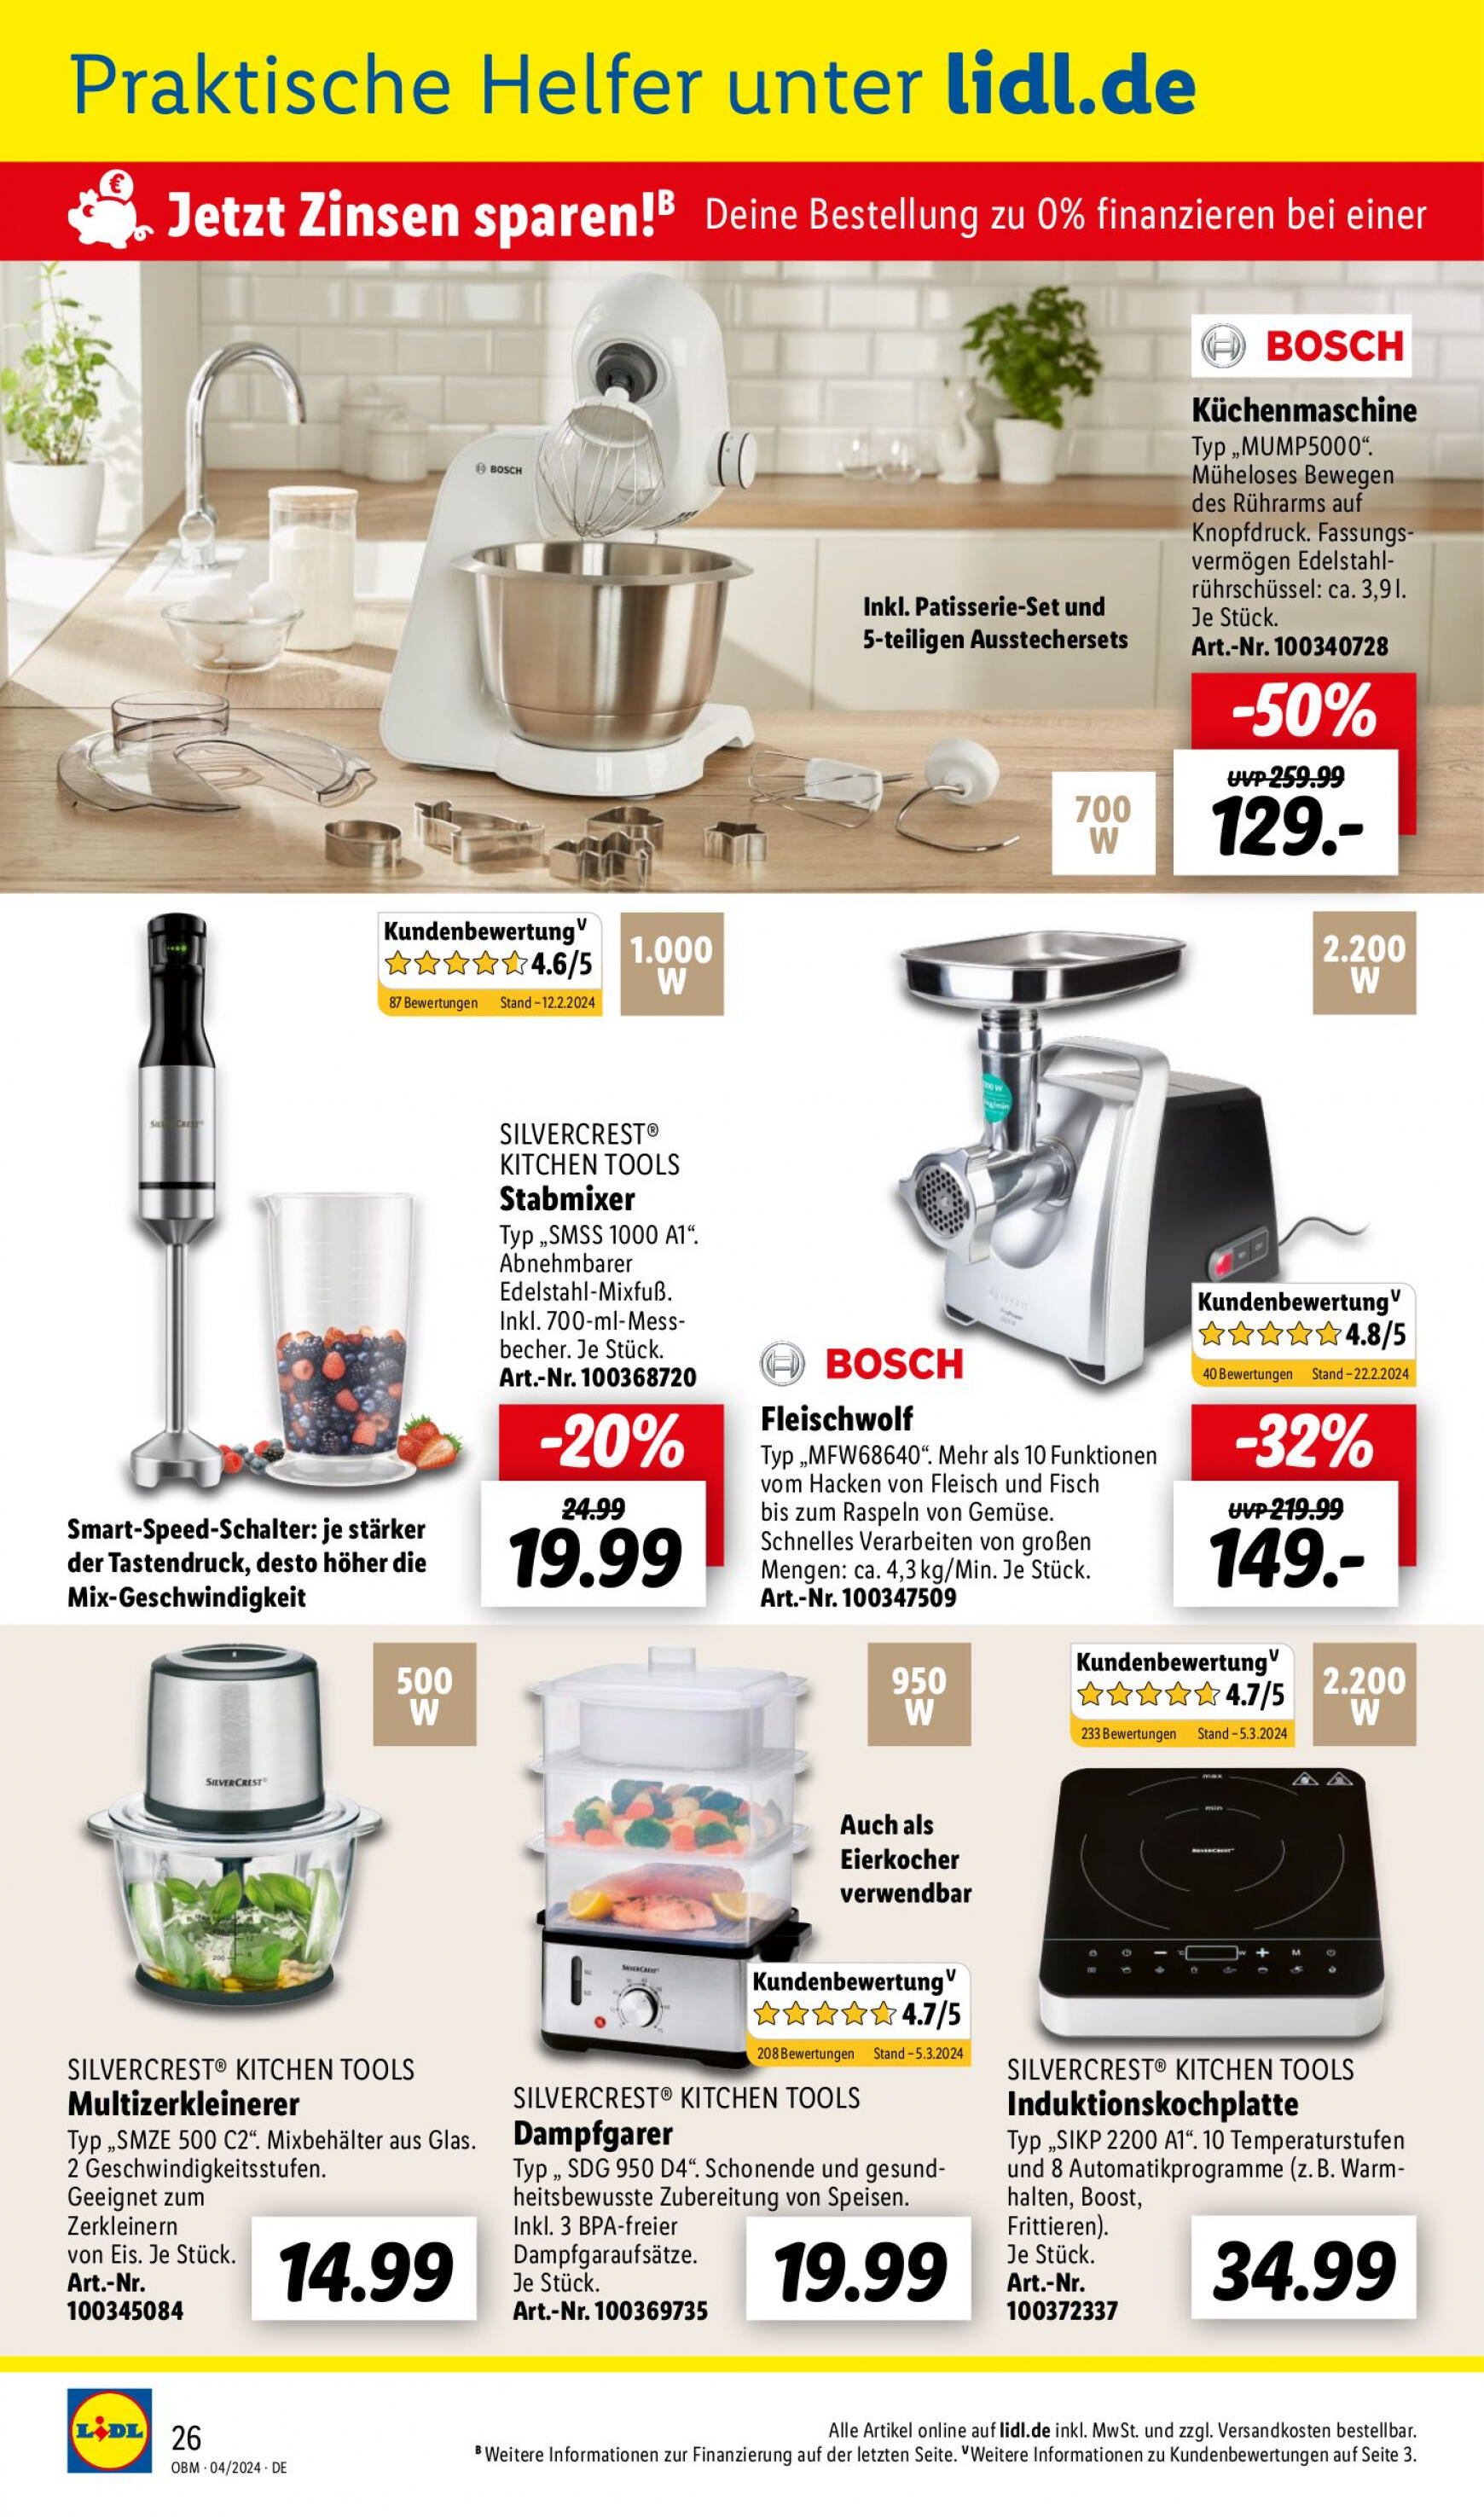 lidl - Flyer Lidl - Aktuelle Onlineshop-Highlights aktuell 01.04. - 30.04. - page: 26